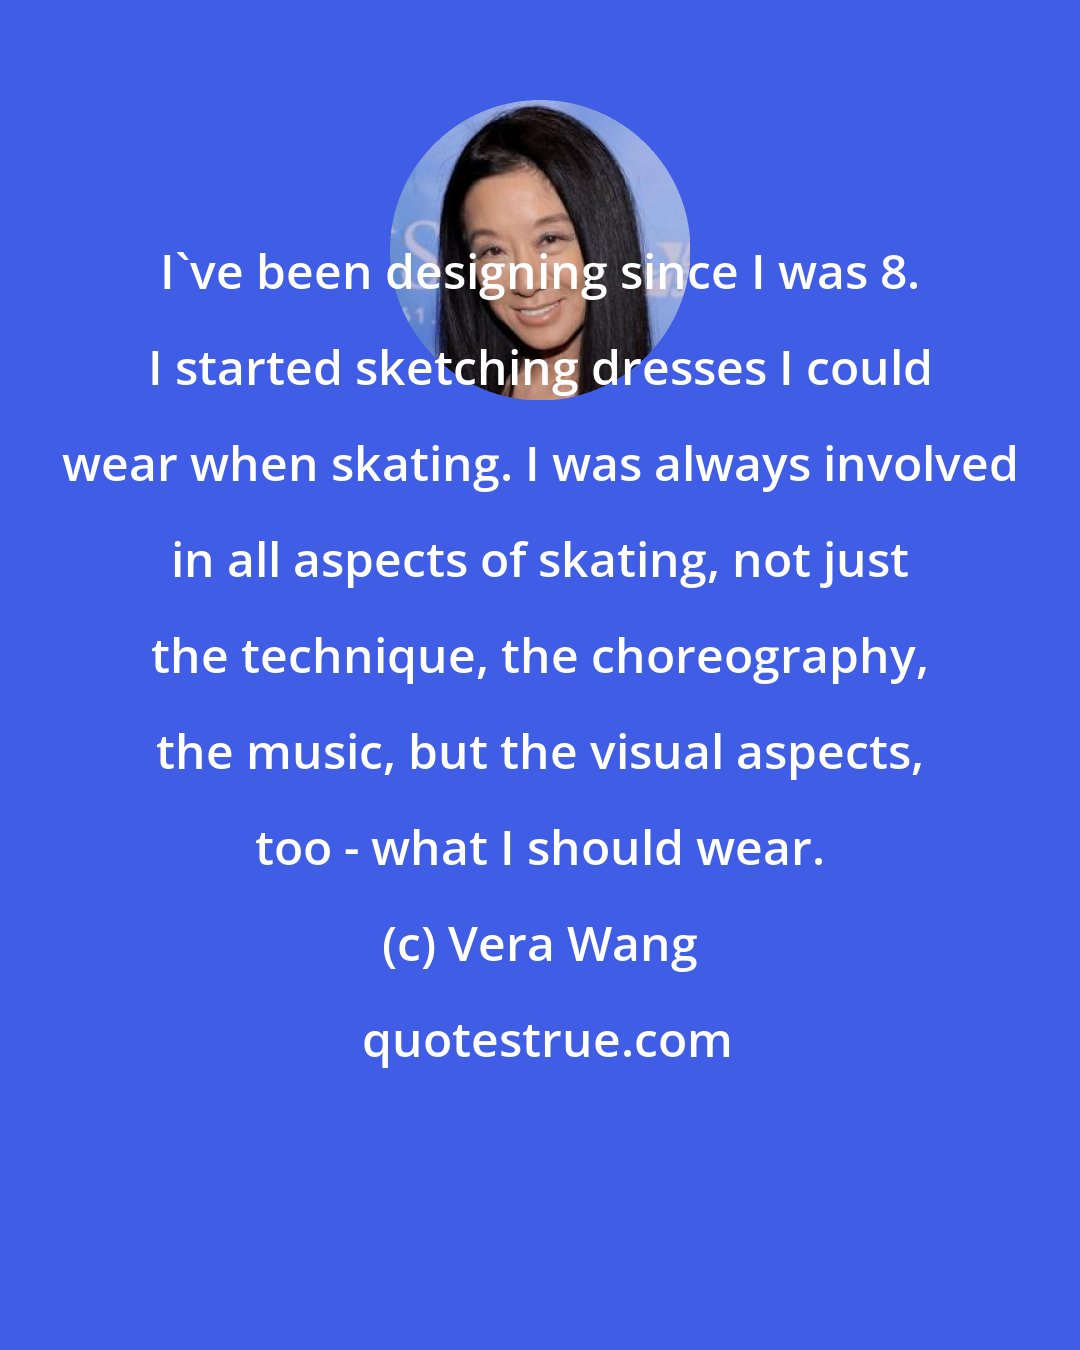 Vera Wang: I've been designing since I was 8. I started sketching dresses I could wear when skating. I was always involved in all aspects of skating, not just the technique, the choreography, the music, but the visual aspects, too - what I should wear.